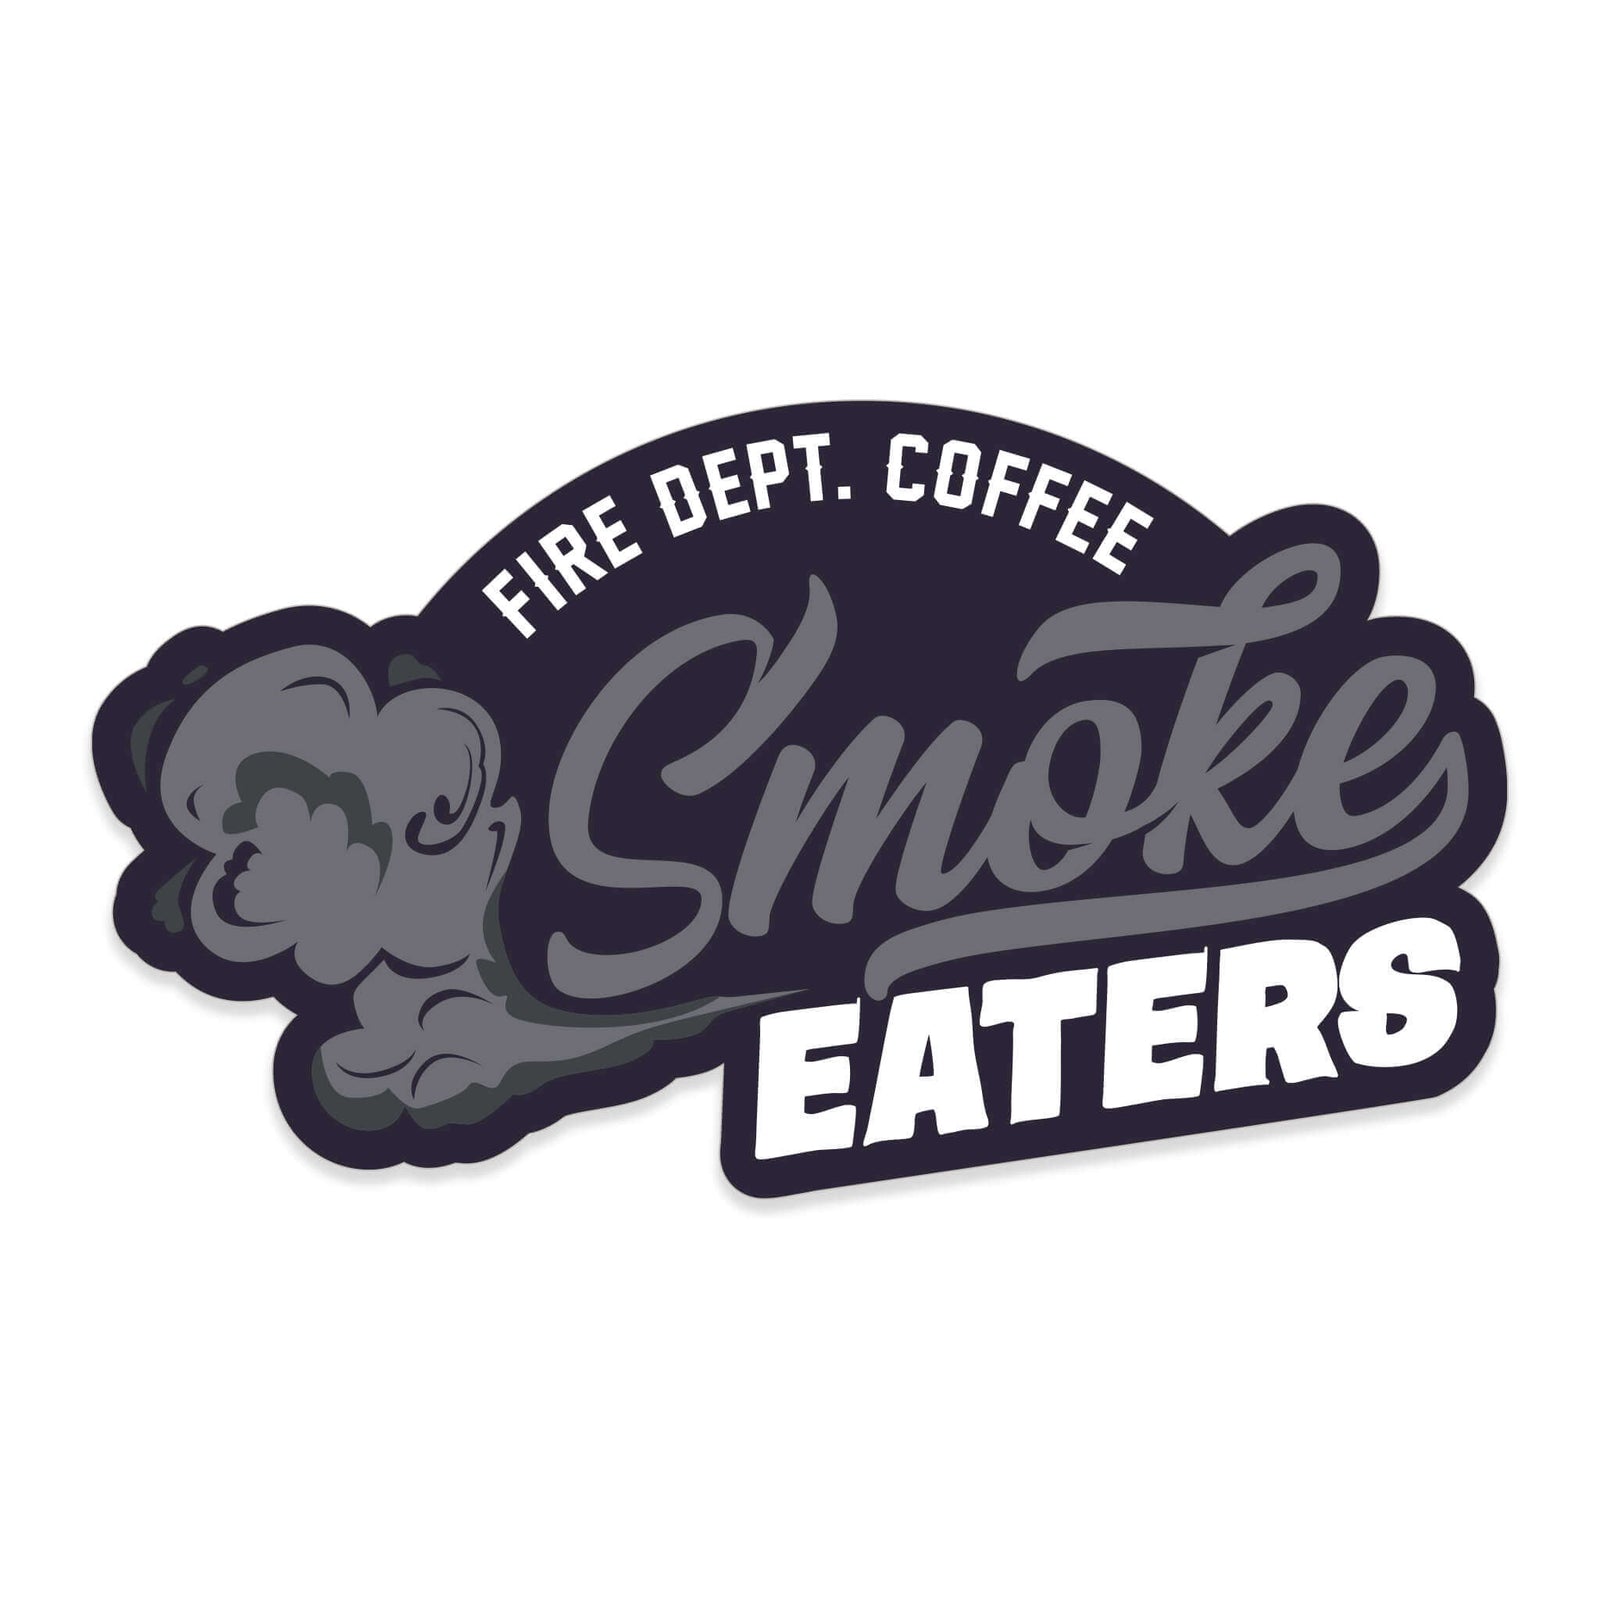 Black sticker with grey and white lettering that says "Fire Dept. Coffee Smoke Eaters" with a smoke design.